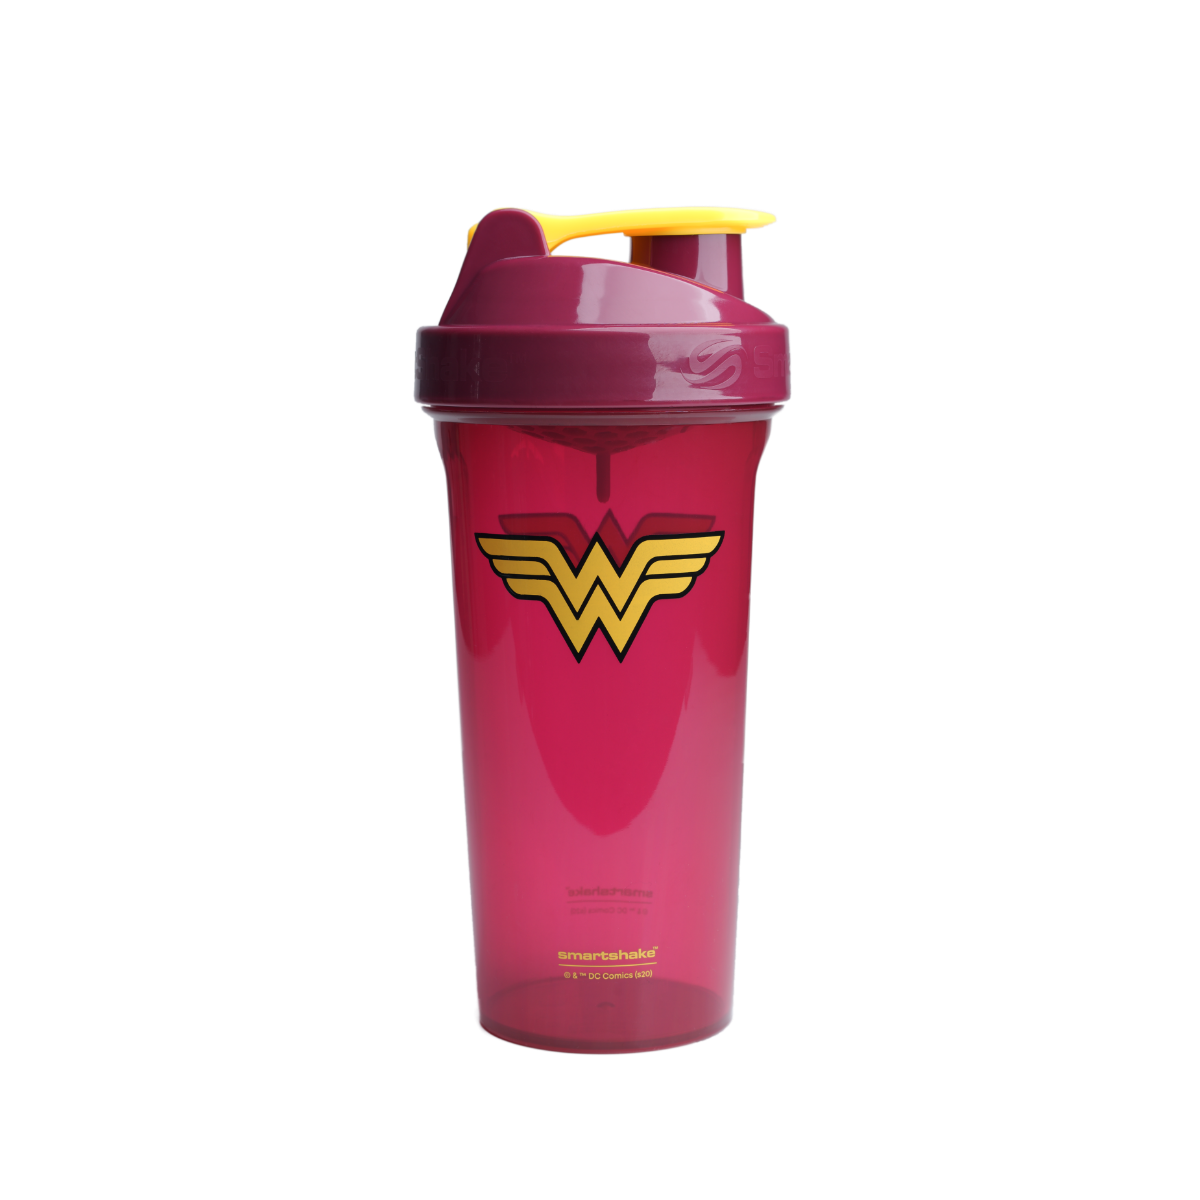  Justice League Protein Powder Storage Container 50g Protein  Shaker Bottle Funnel – 110ml BPA Free Wonder Woman Gifts DC Comics Protein  Shakes Bottle Storage for Women : Home & Kitchen